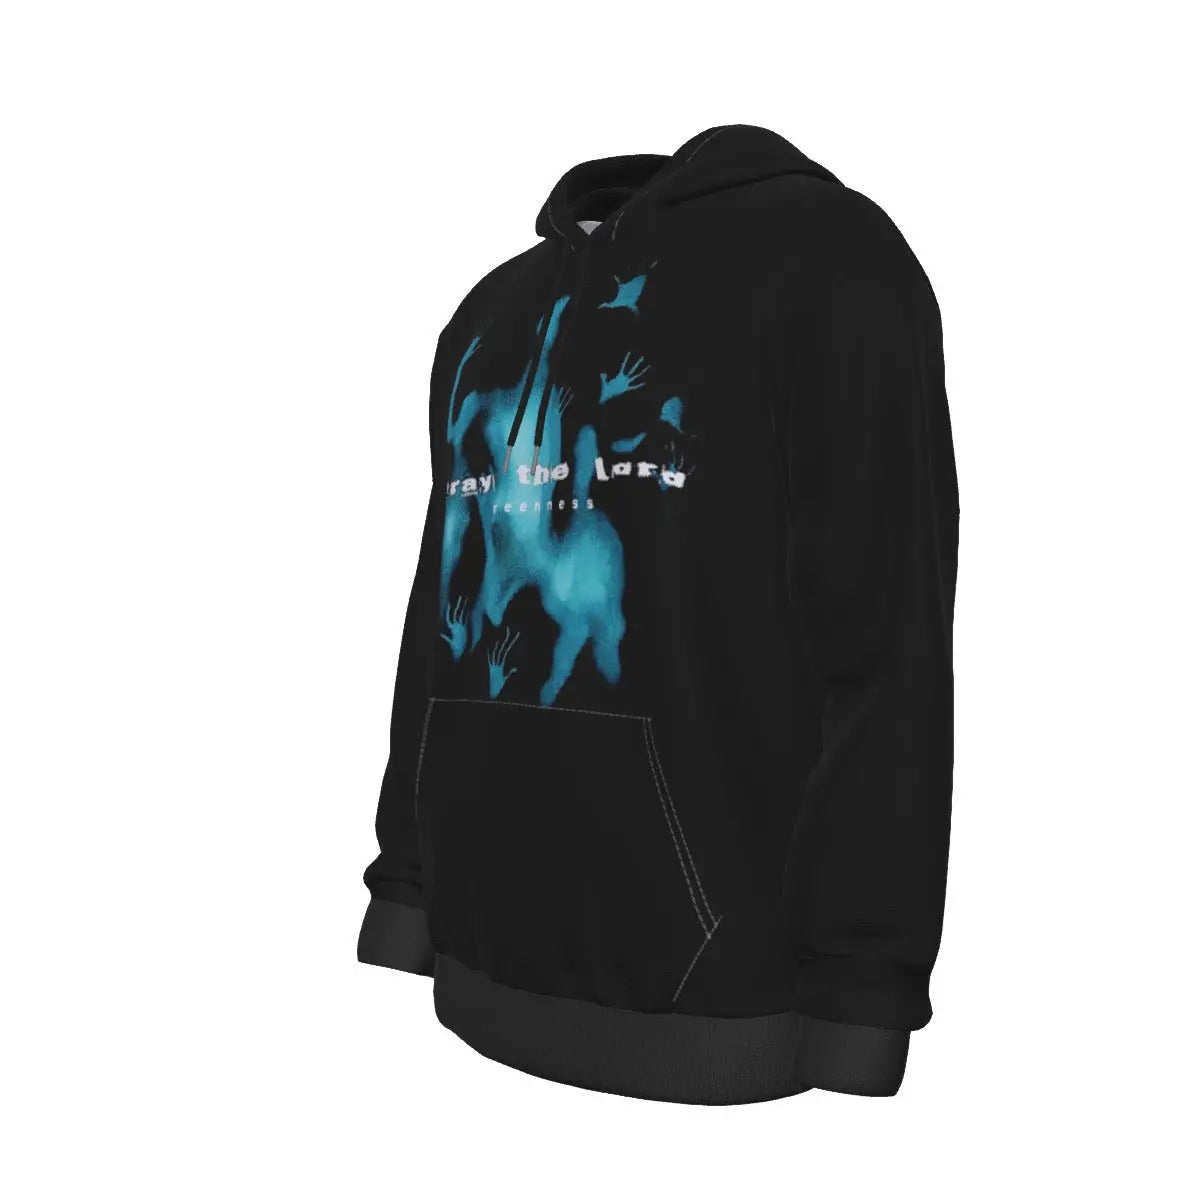 "Mystic Fusion" Men And Women Streetwear Graphic Hoodie Ver.1 Yoycol